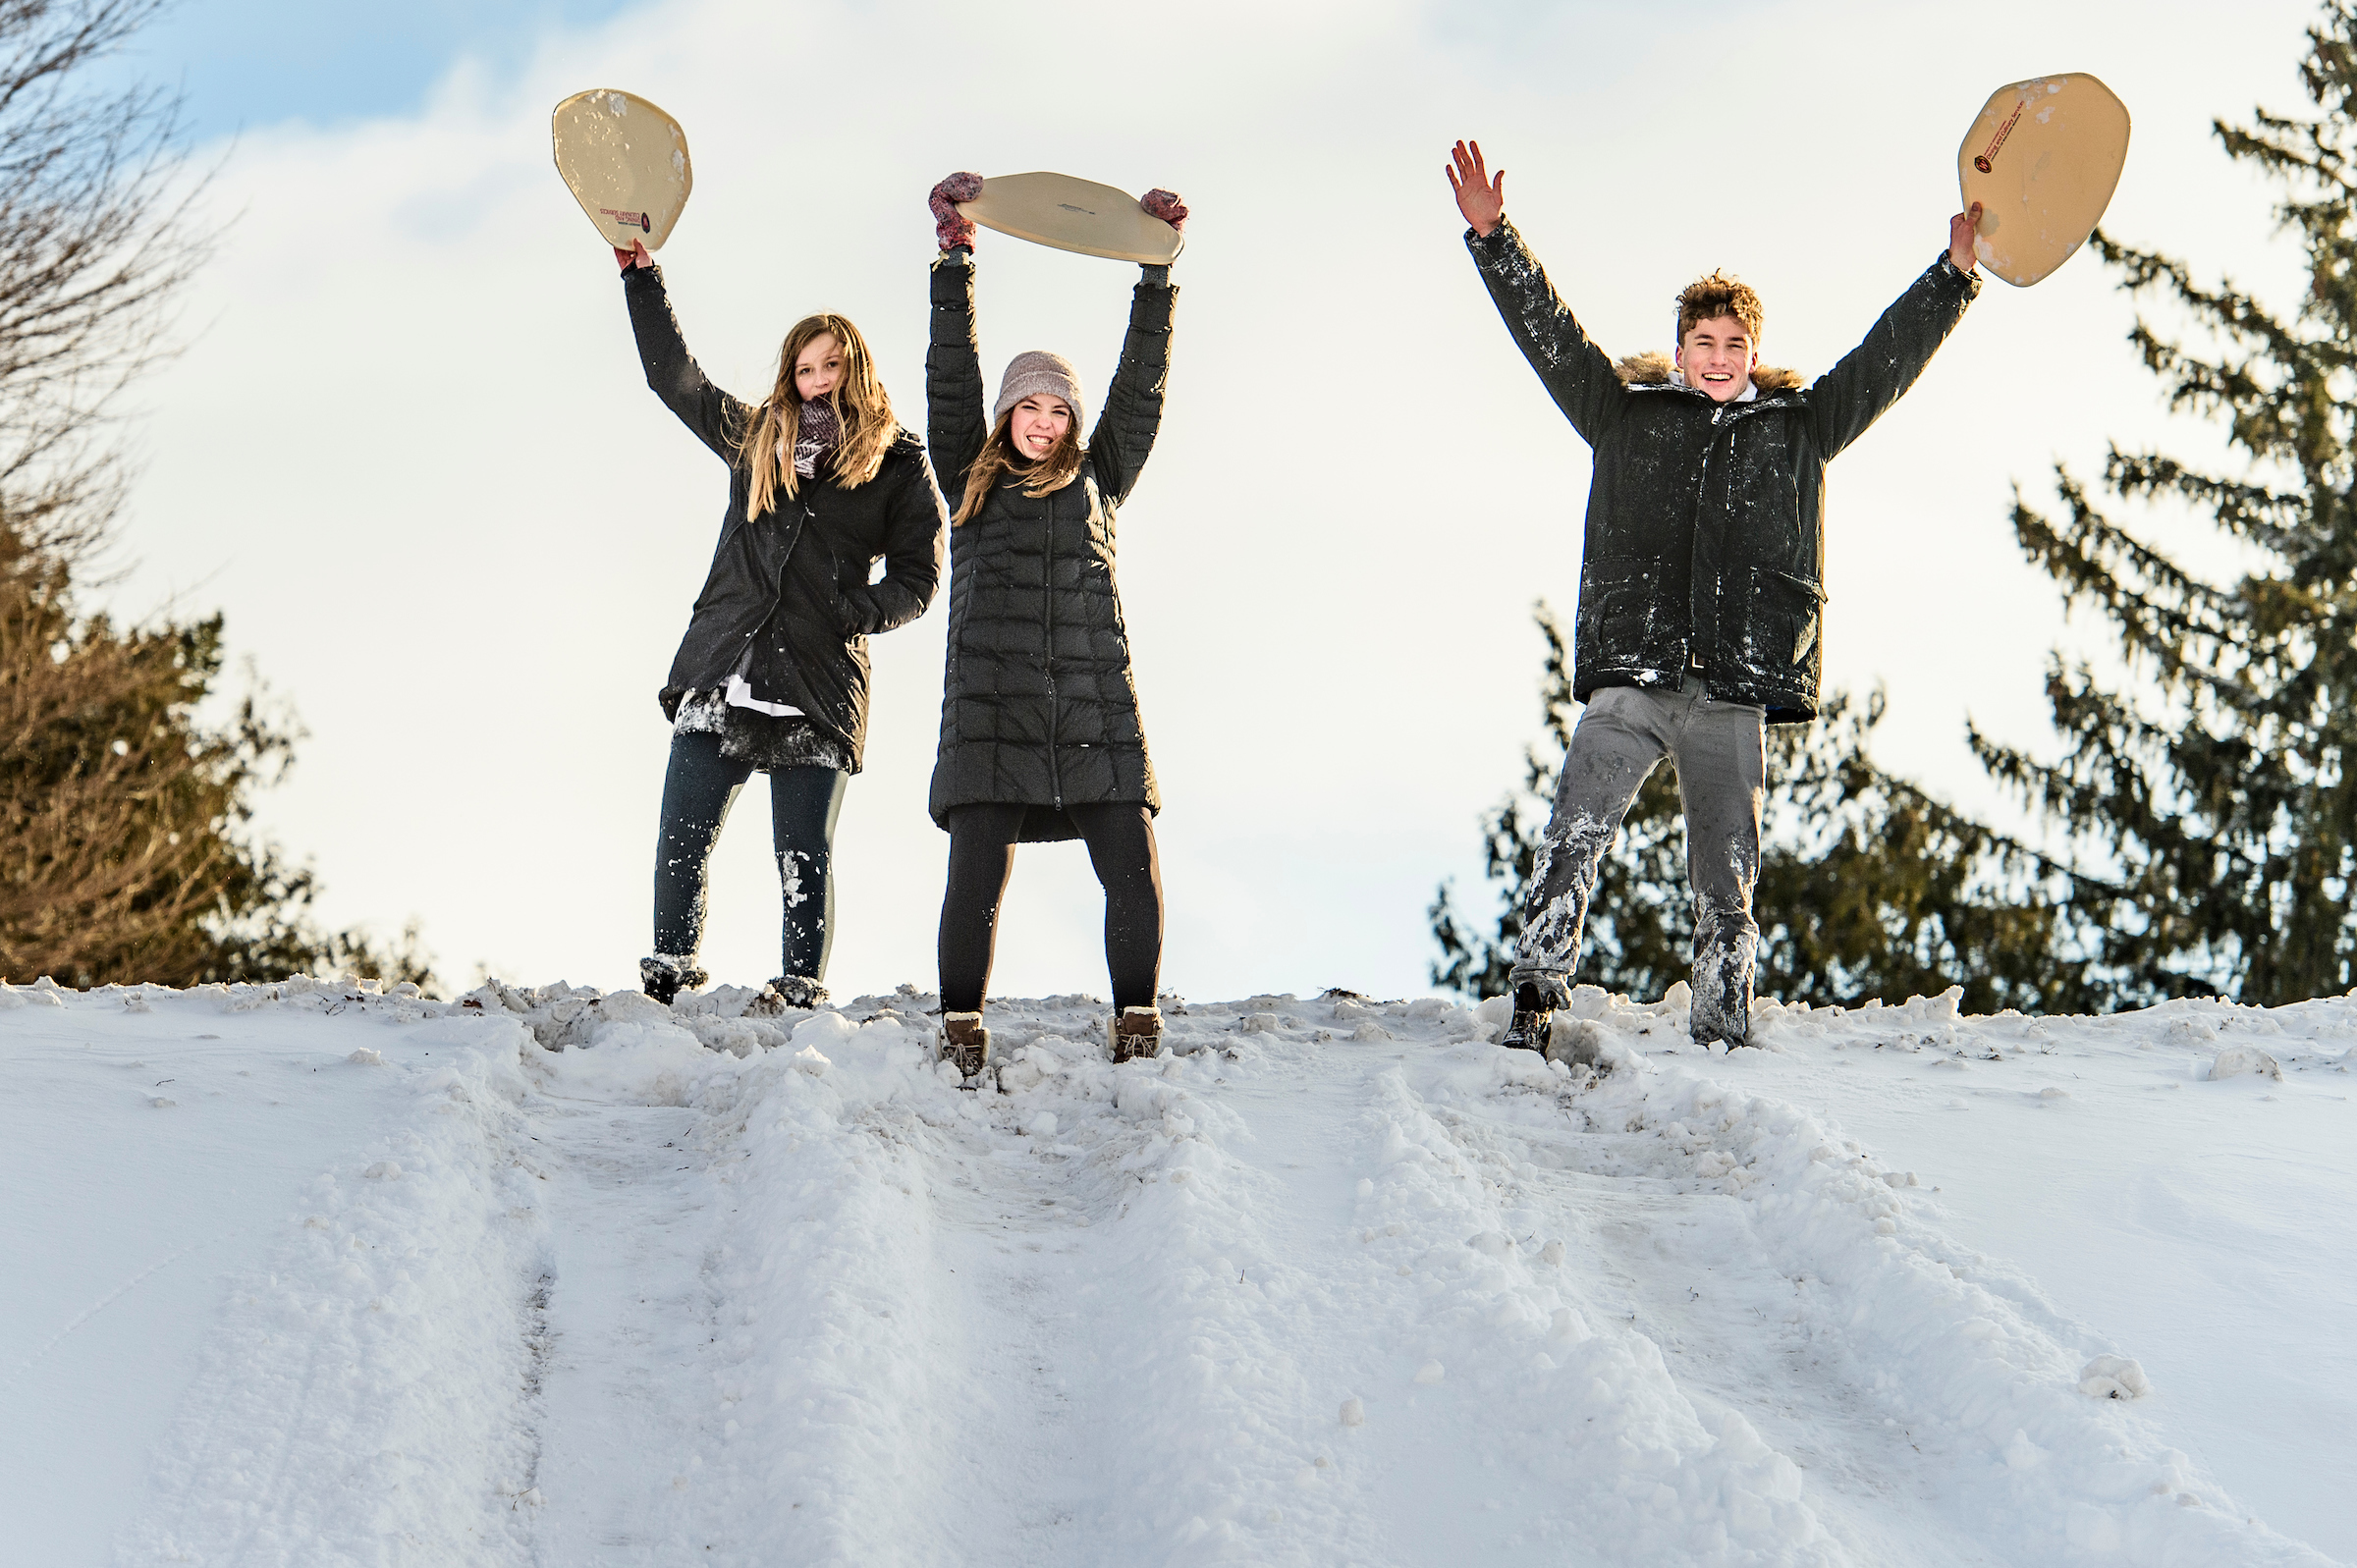 Students hold cafeteria trays above their heads as they prepare to sled down a snowy Observatory Hill